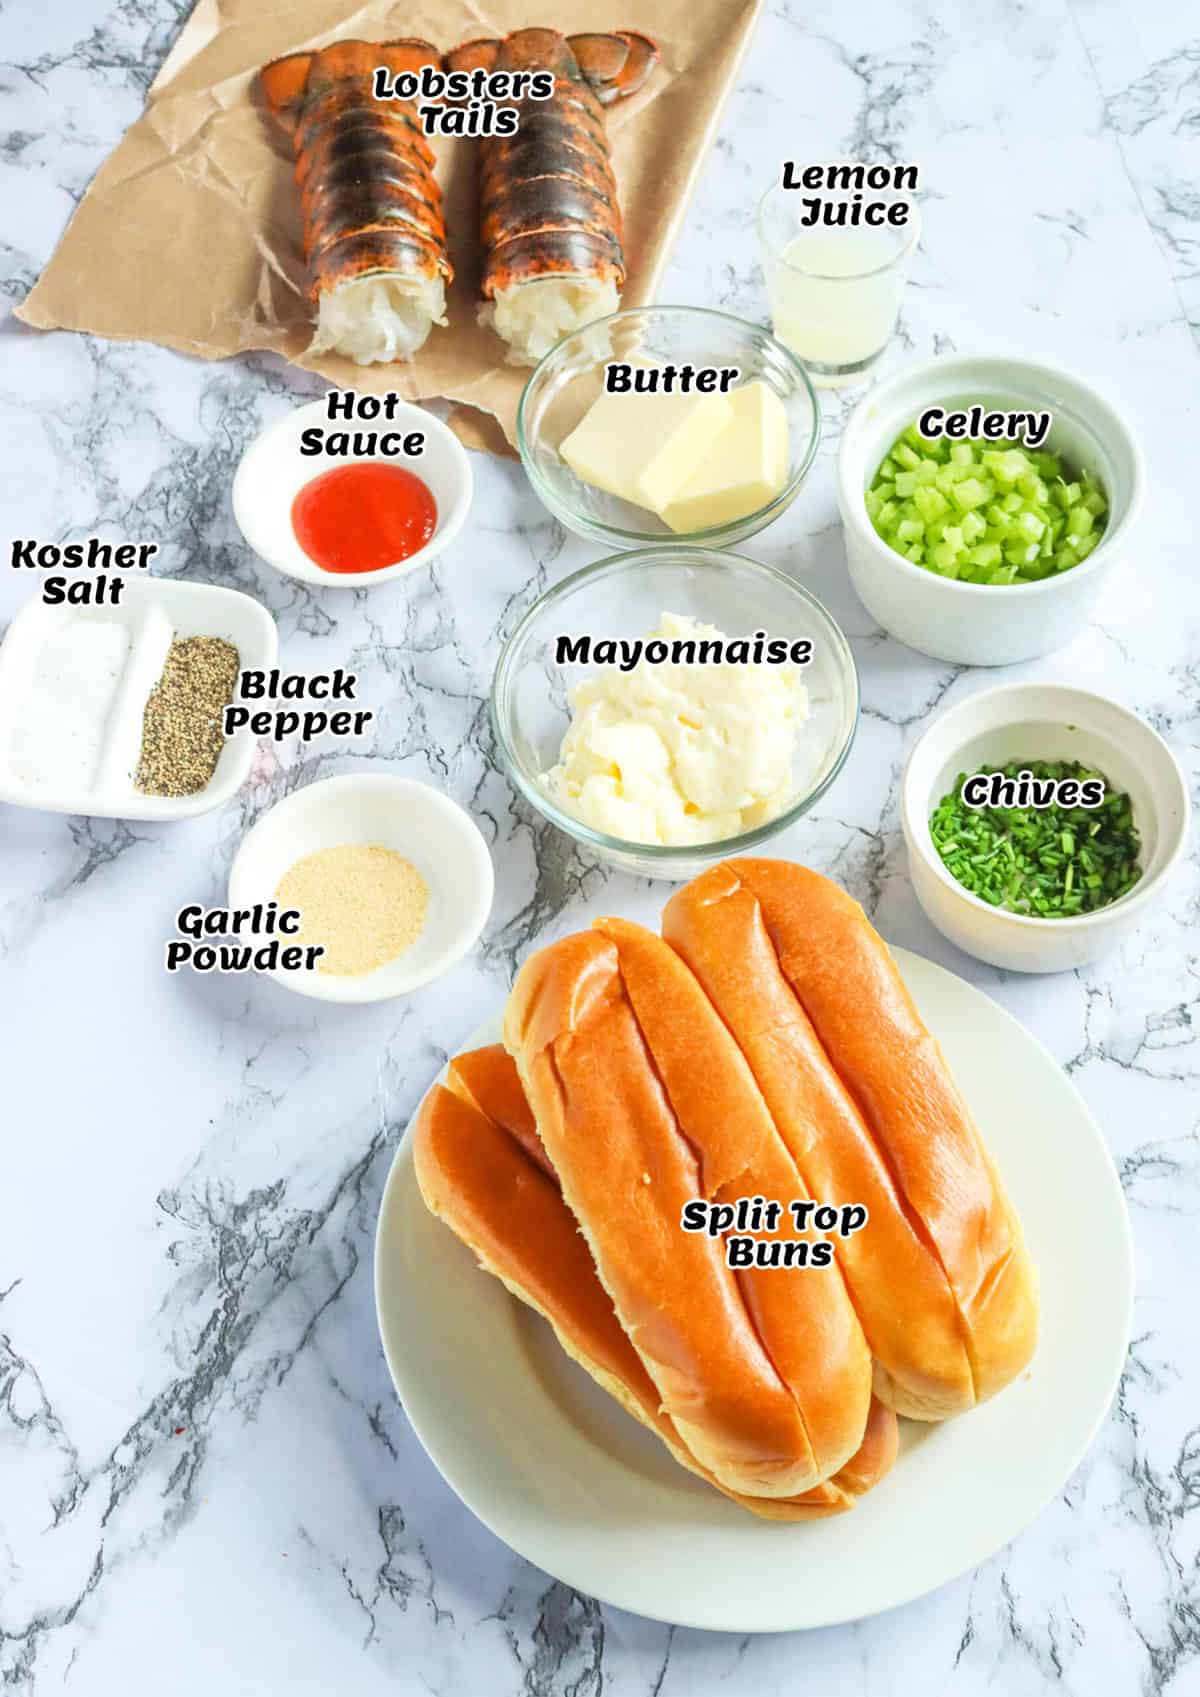 What you need to make lobster rolls